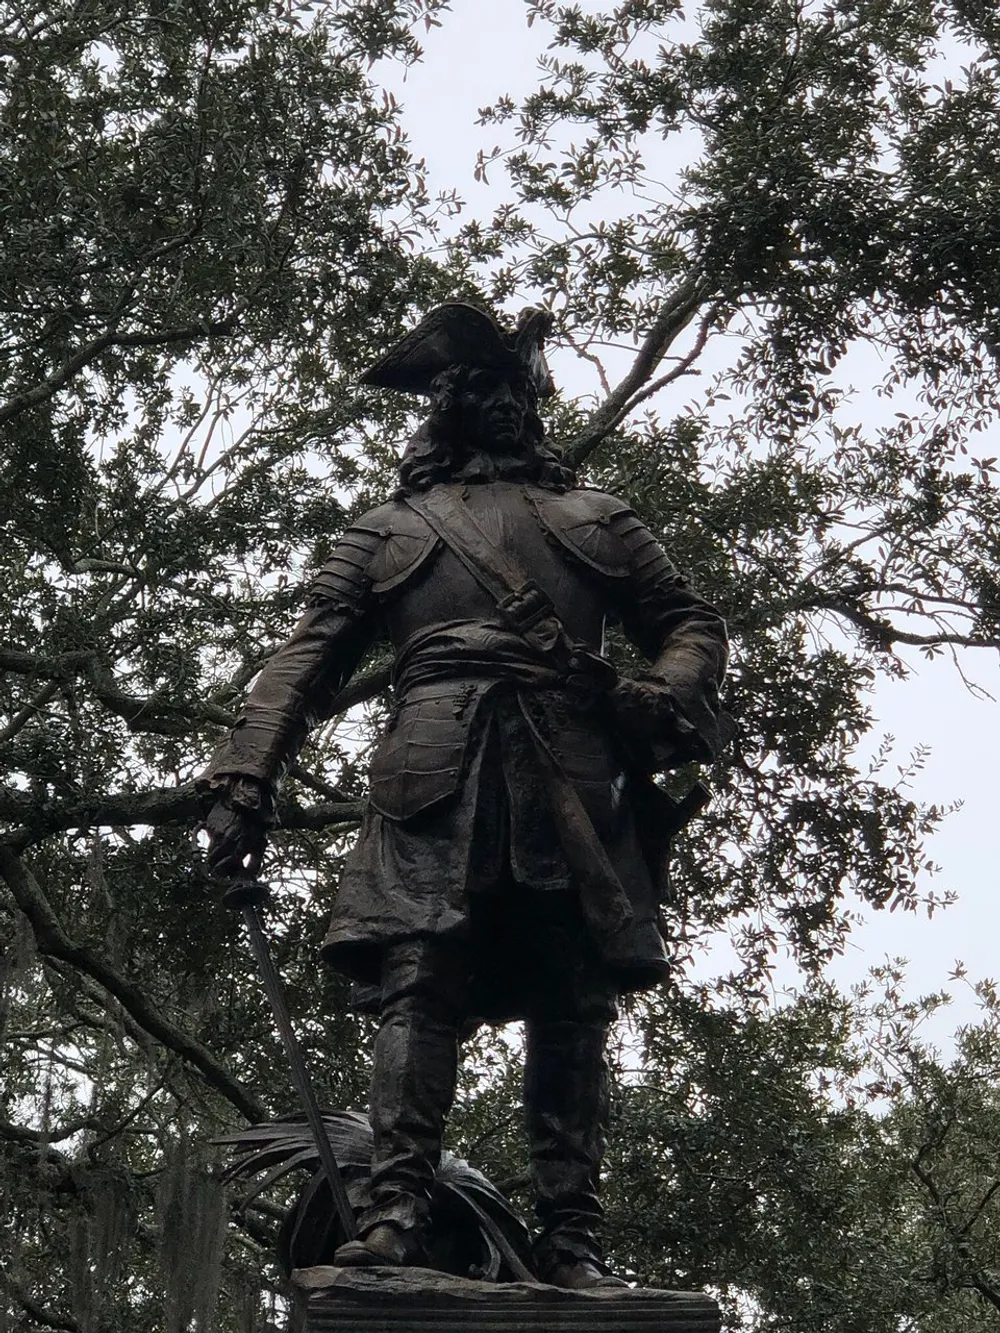 The image shows a statue of a historical figure in traditional attire including a tricorne hat and a sword set against a backdrop of leafy trees